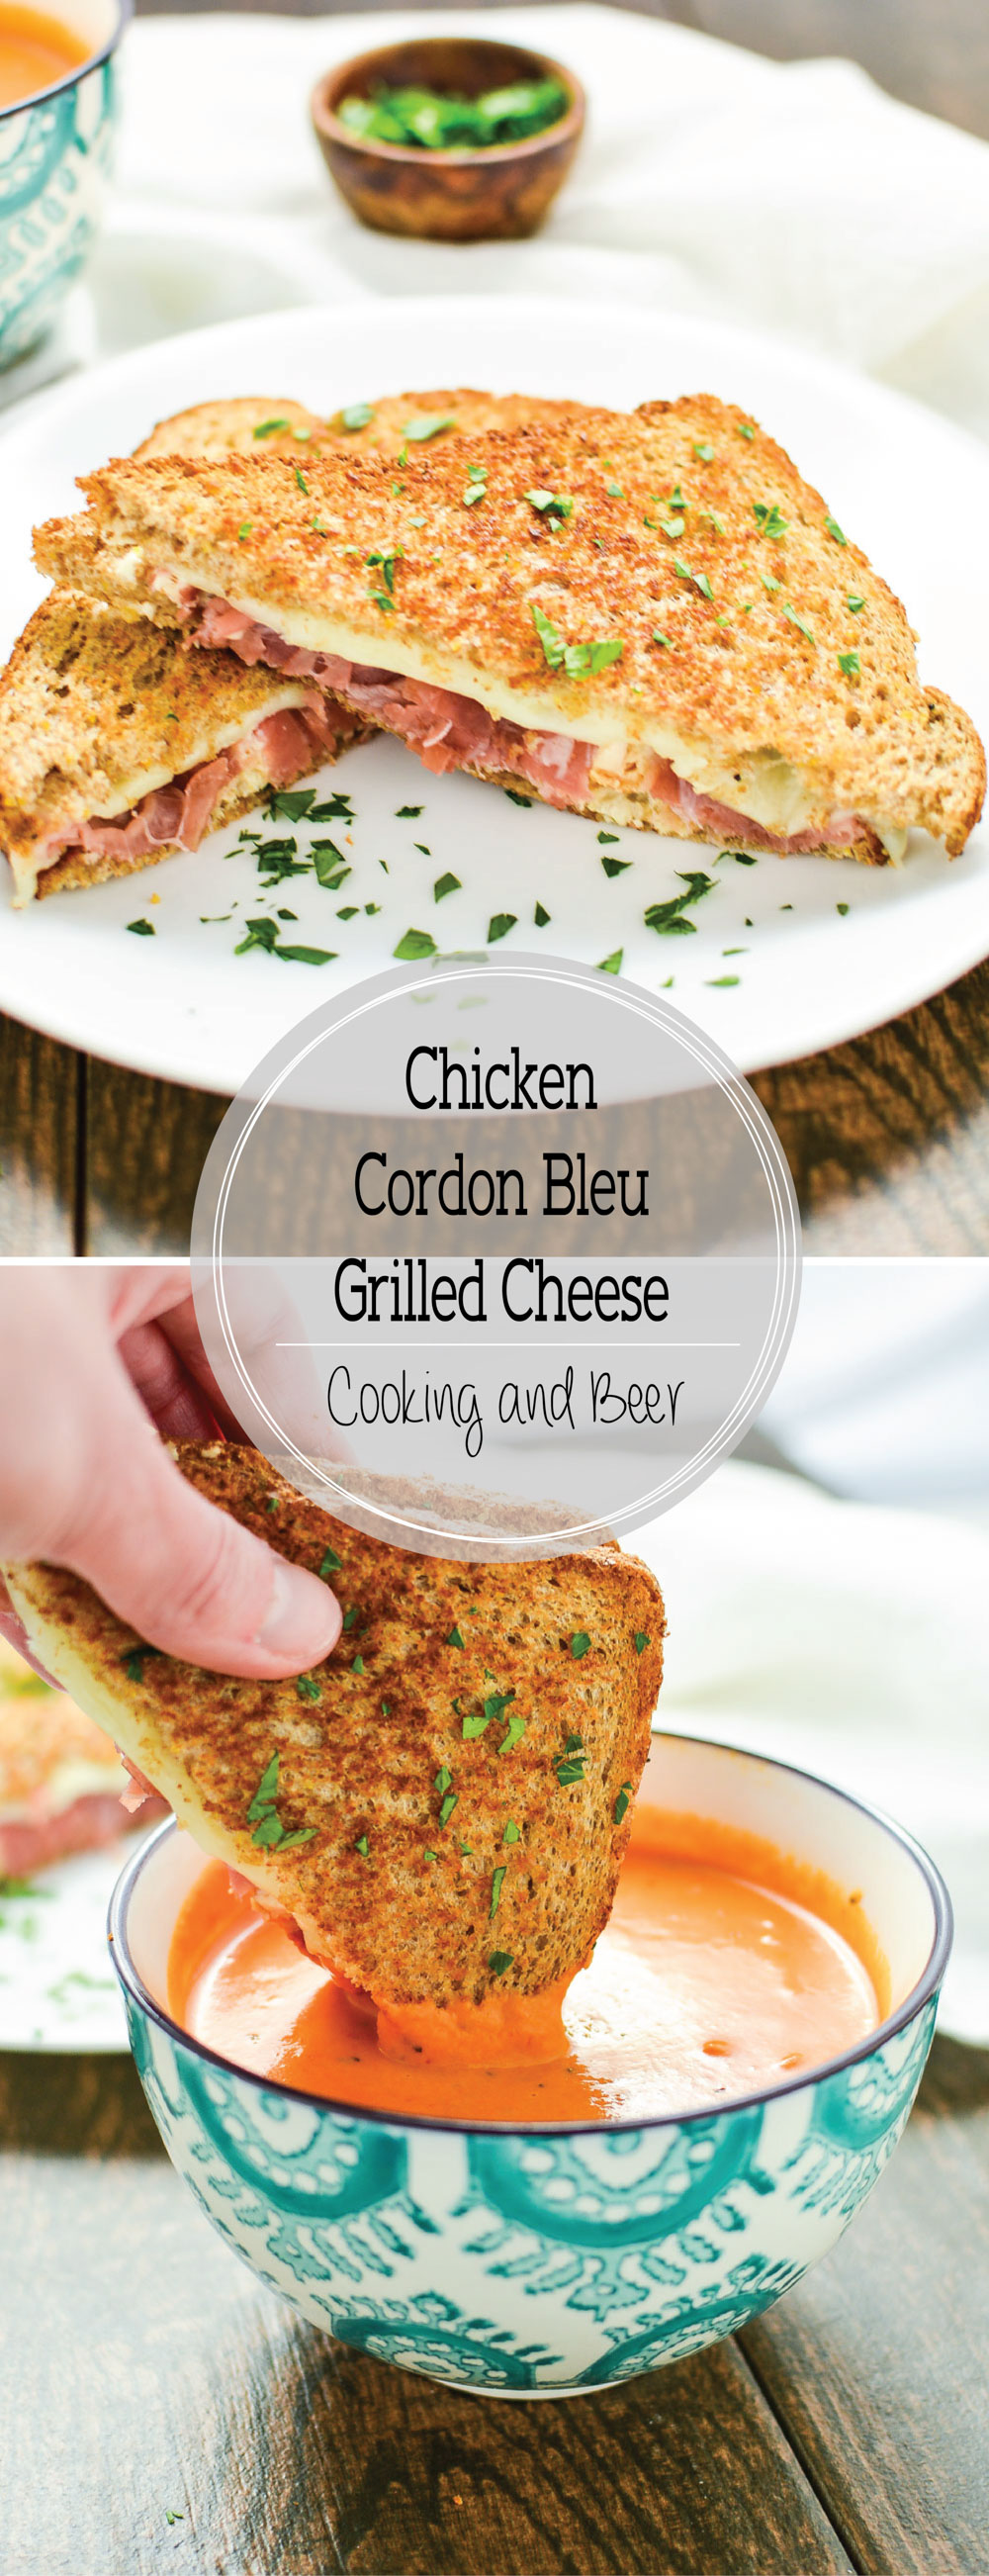 Grilled cheese is taken to the next level with this chicken cordon bleu grilled cheese!